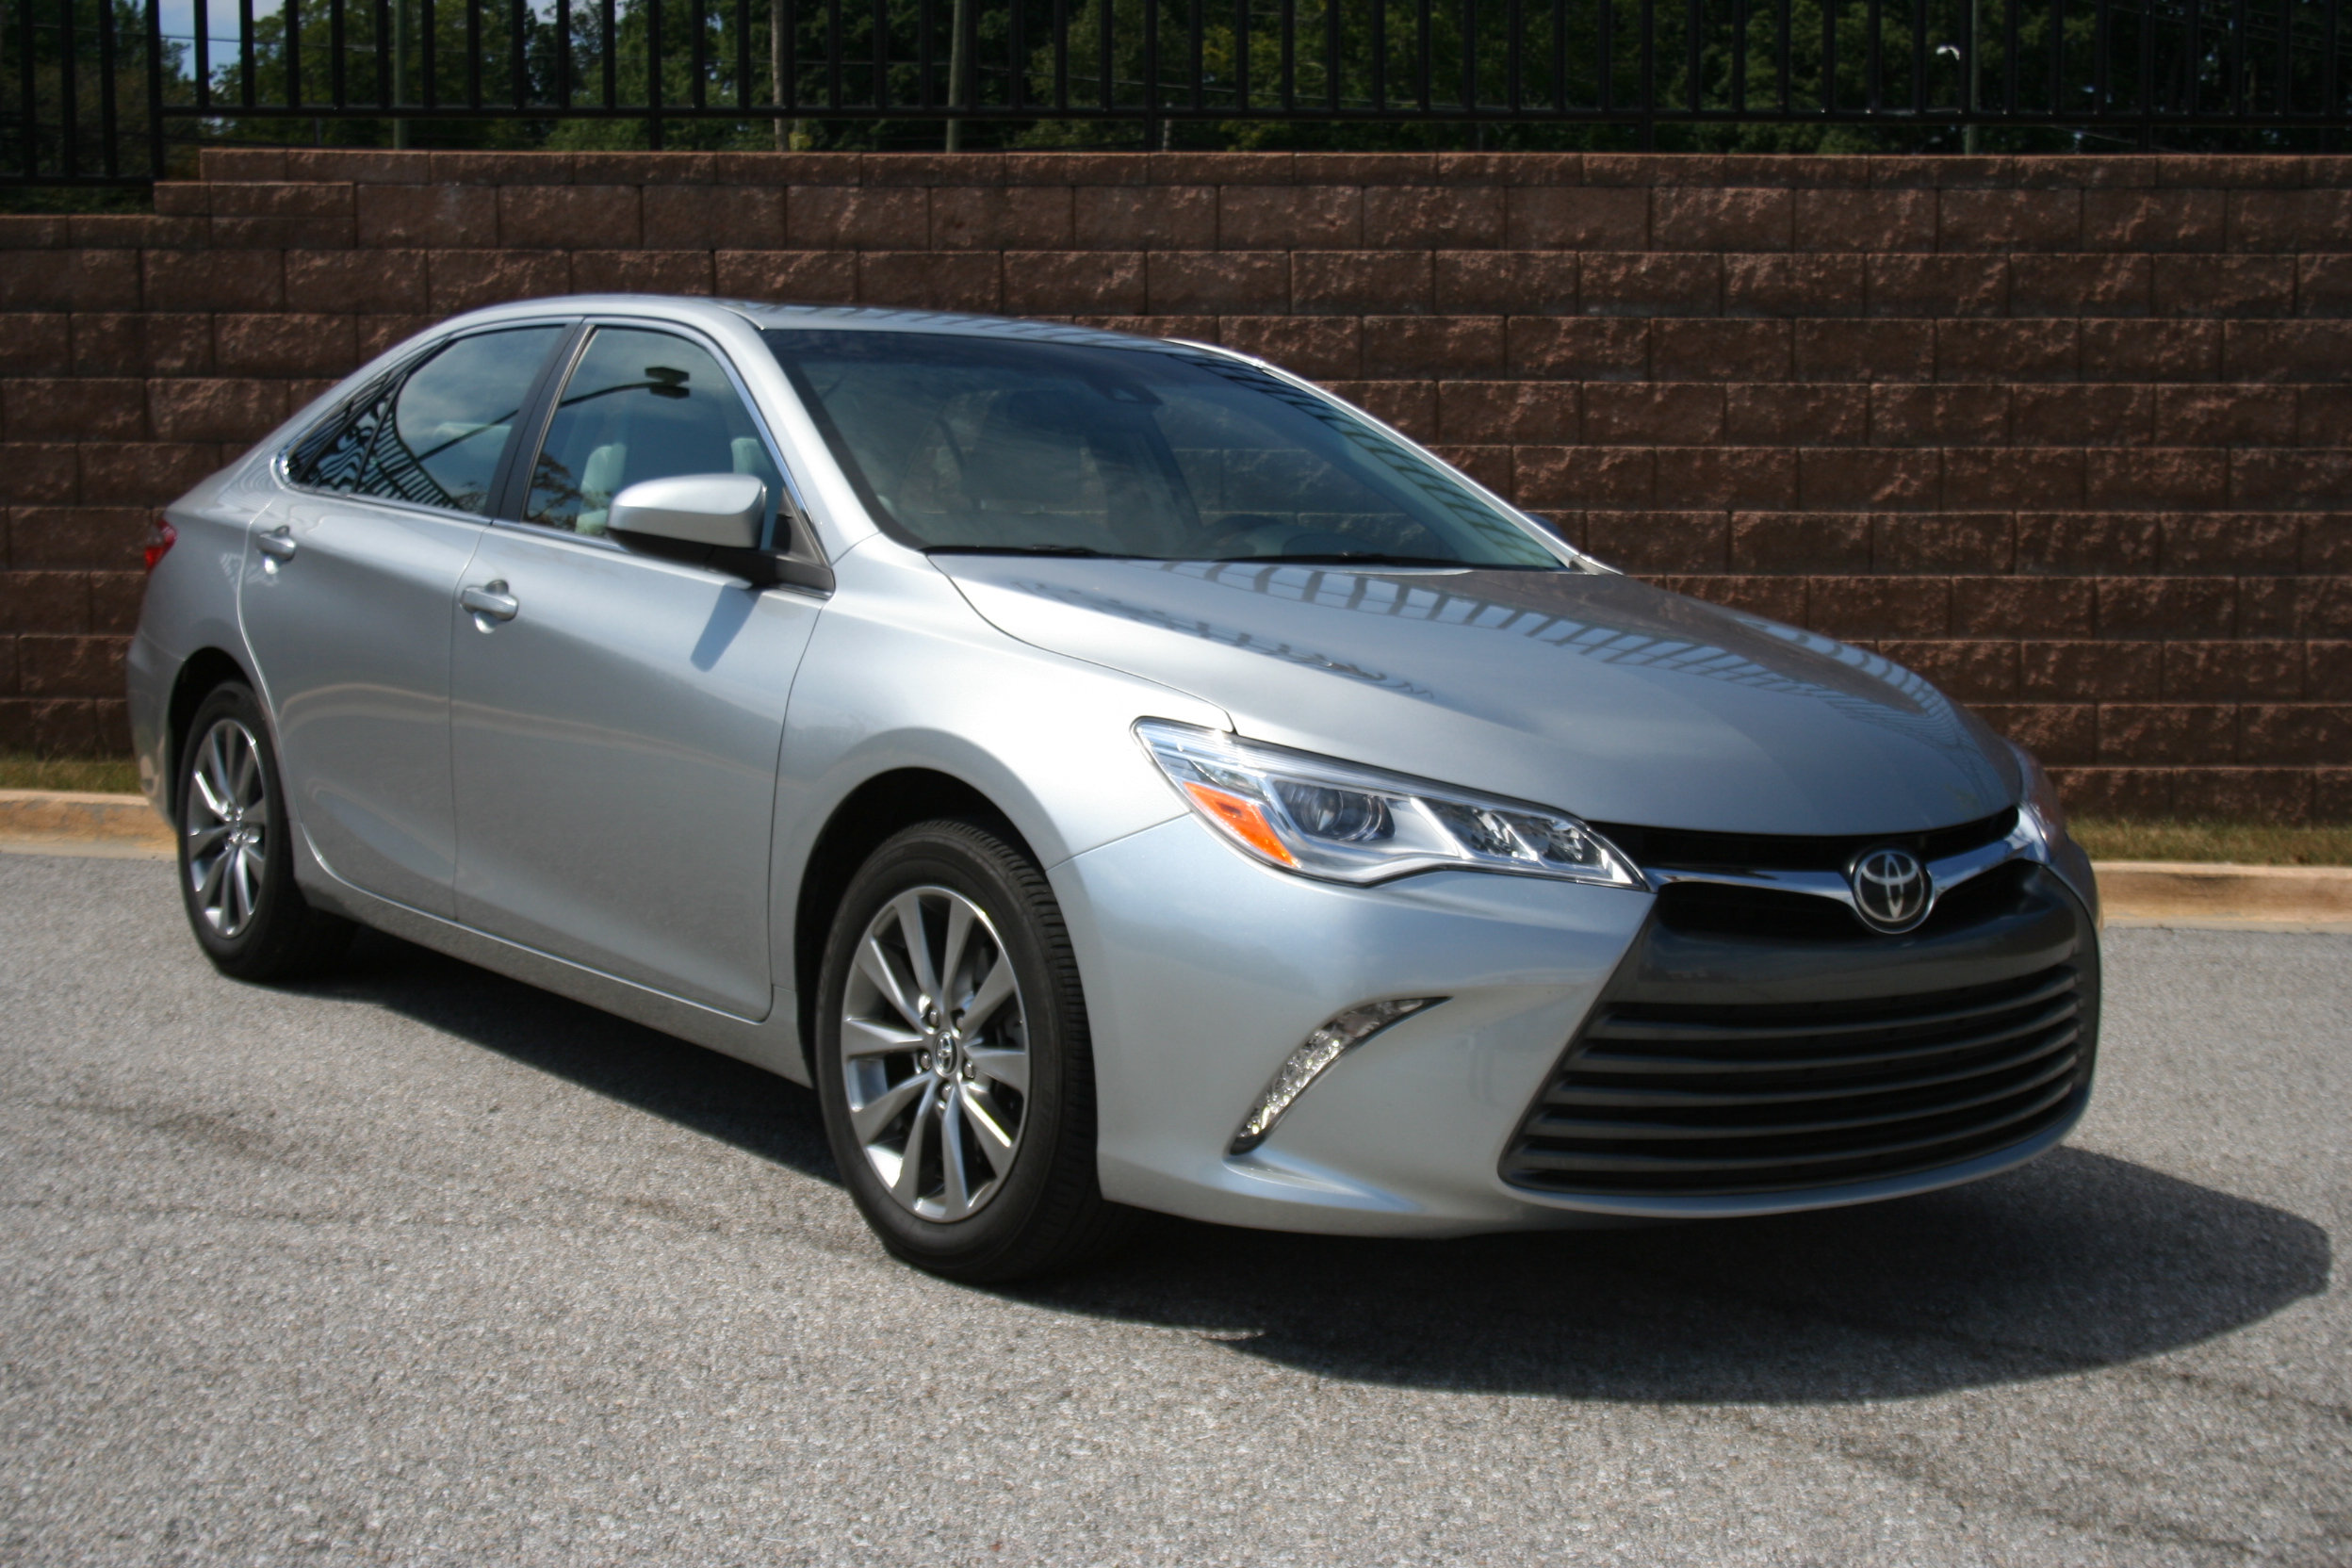 Car Report: Toyota Camry XLE overhauled in 2015